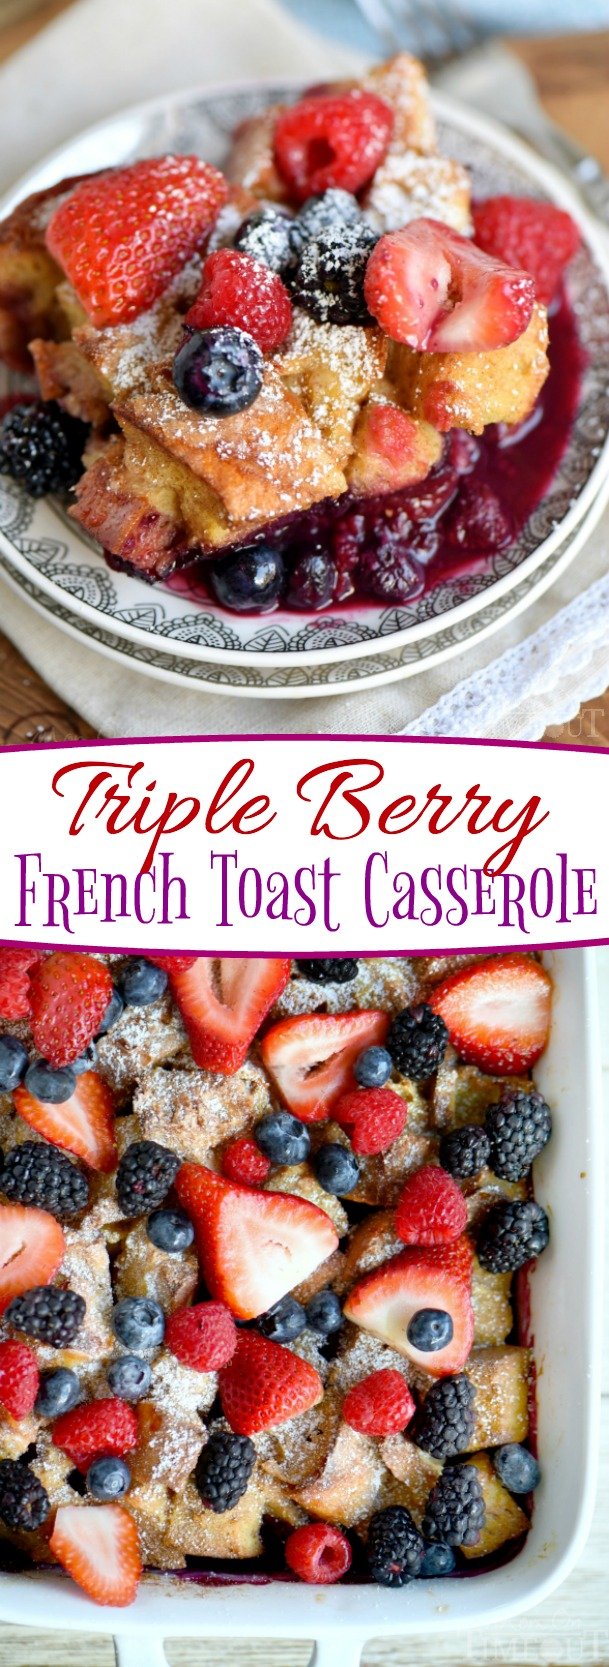 This Triple Berry French Toast Casserole is going to be a new family favorite! Incredibly easy and bursting with berry flavor! Great for breakfast or brunch, Christmas, Easter, Mother's Day and more! // Mom On Timeout